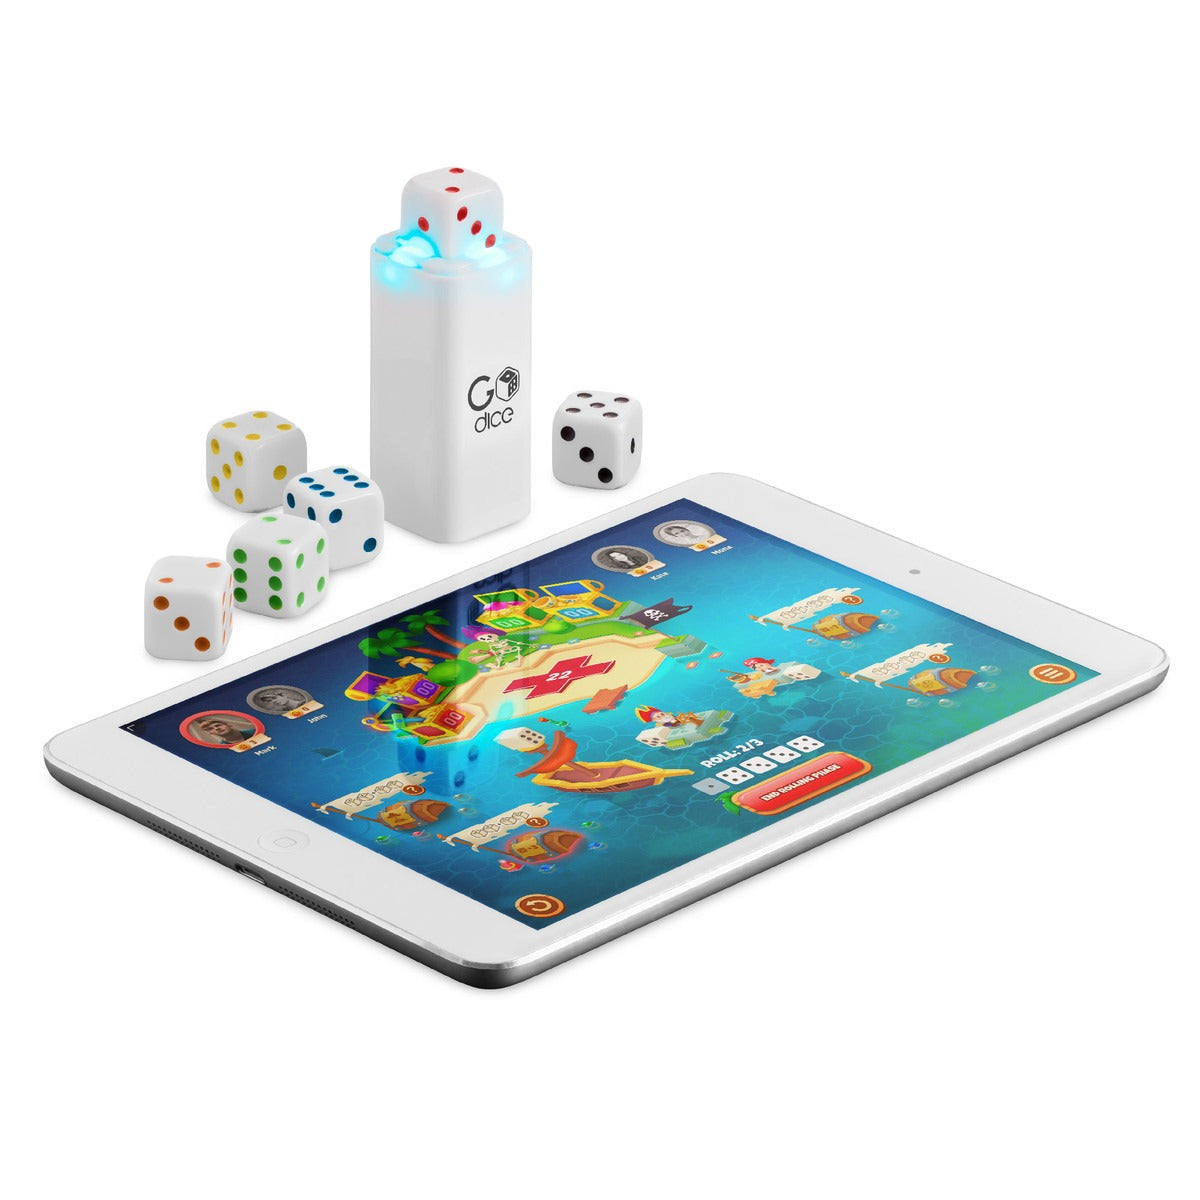 dice set that connects to the app